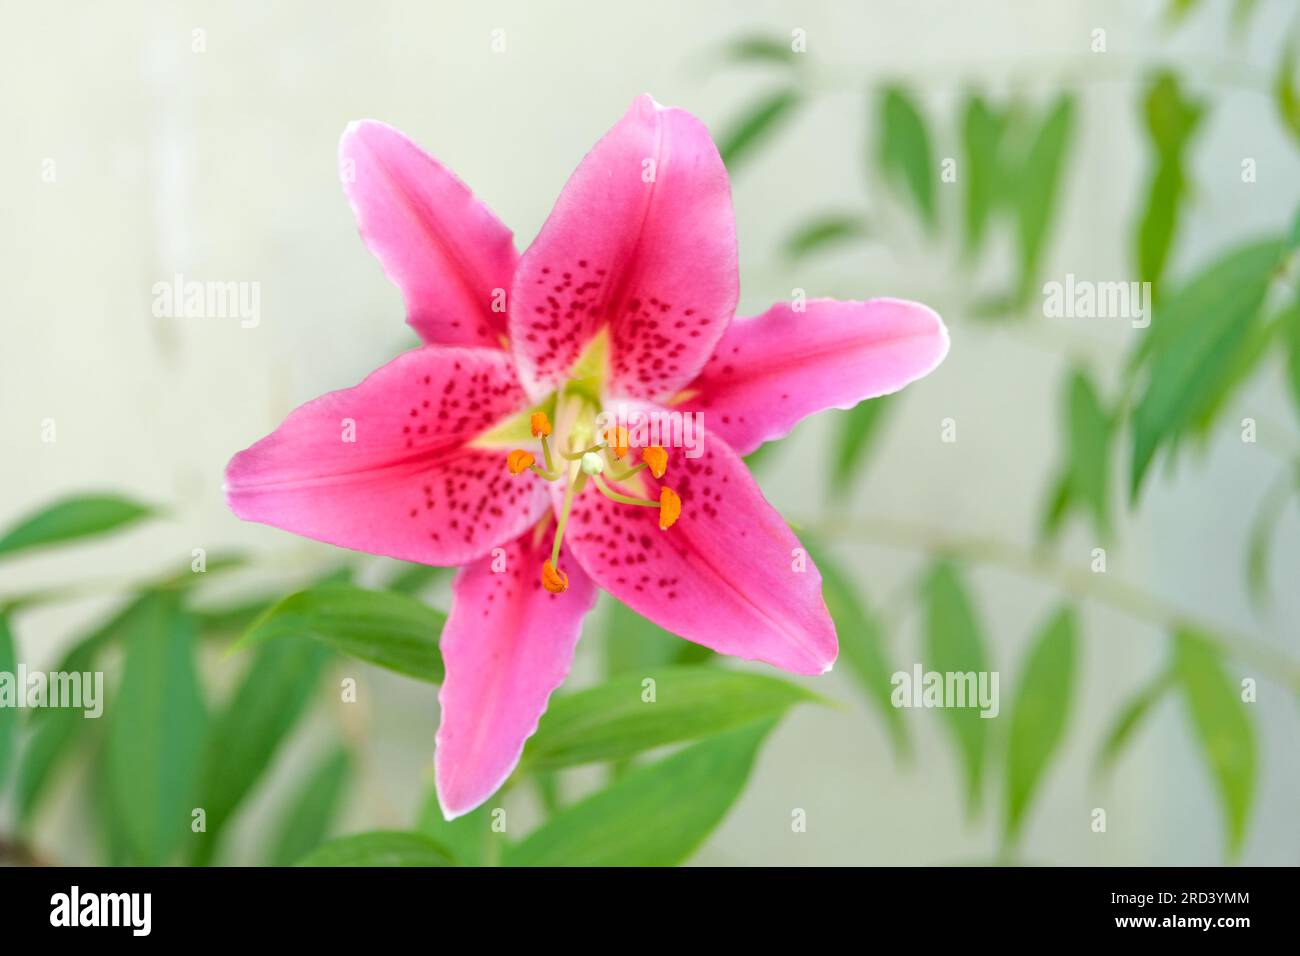 Close up pink trumpet lily with isolated green leaves background. Stock Photo